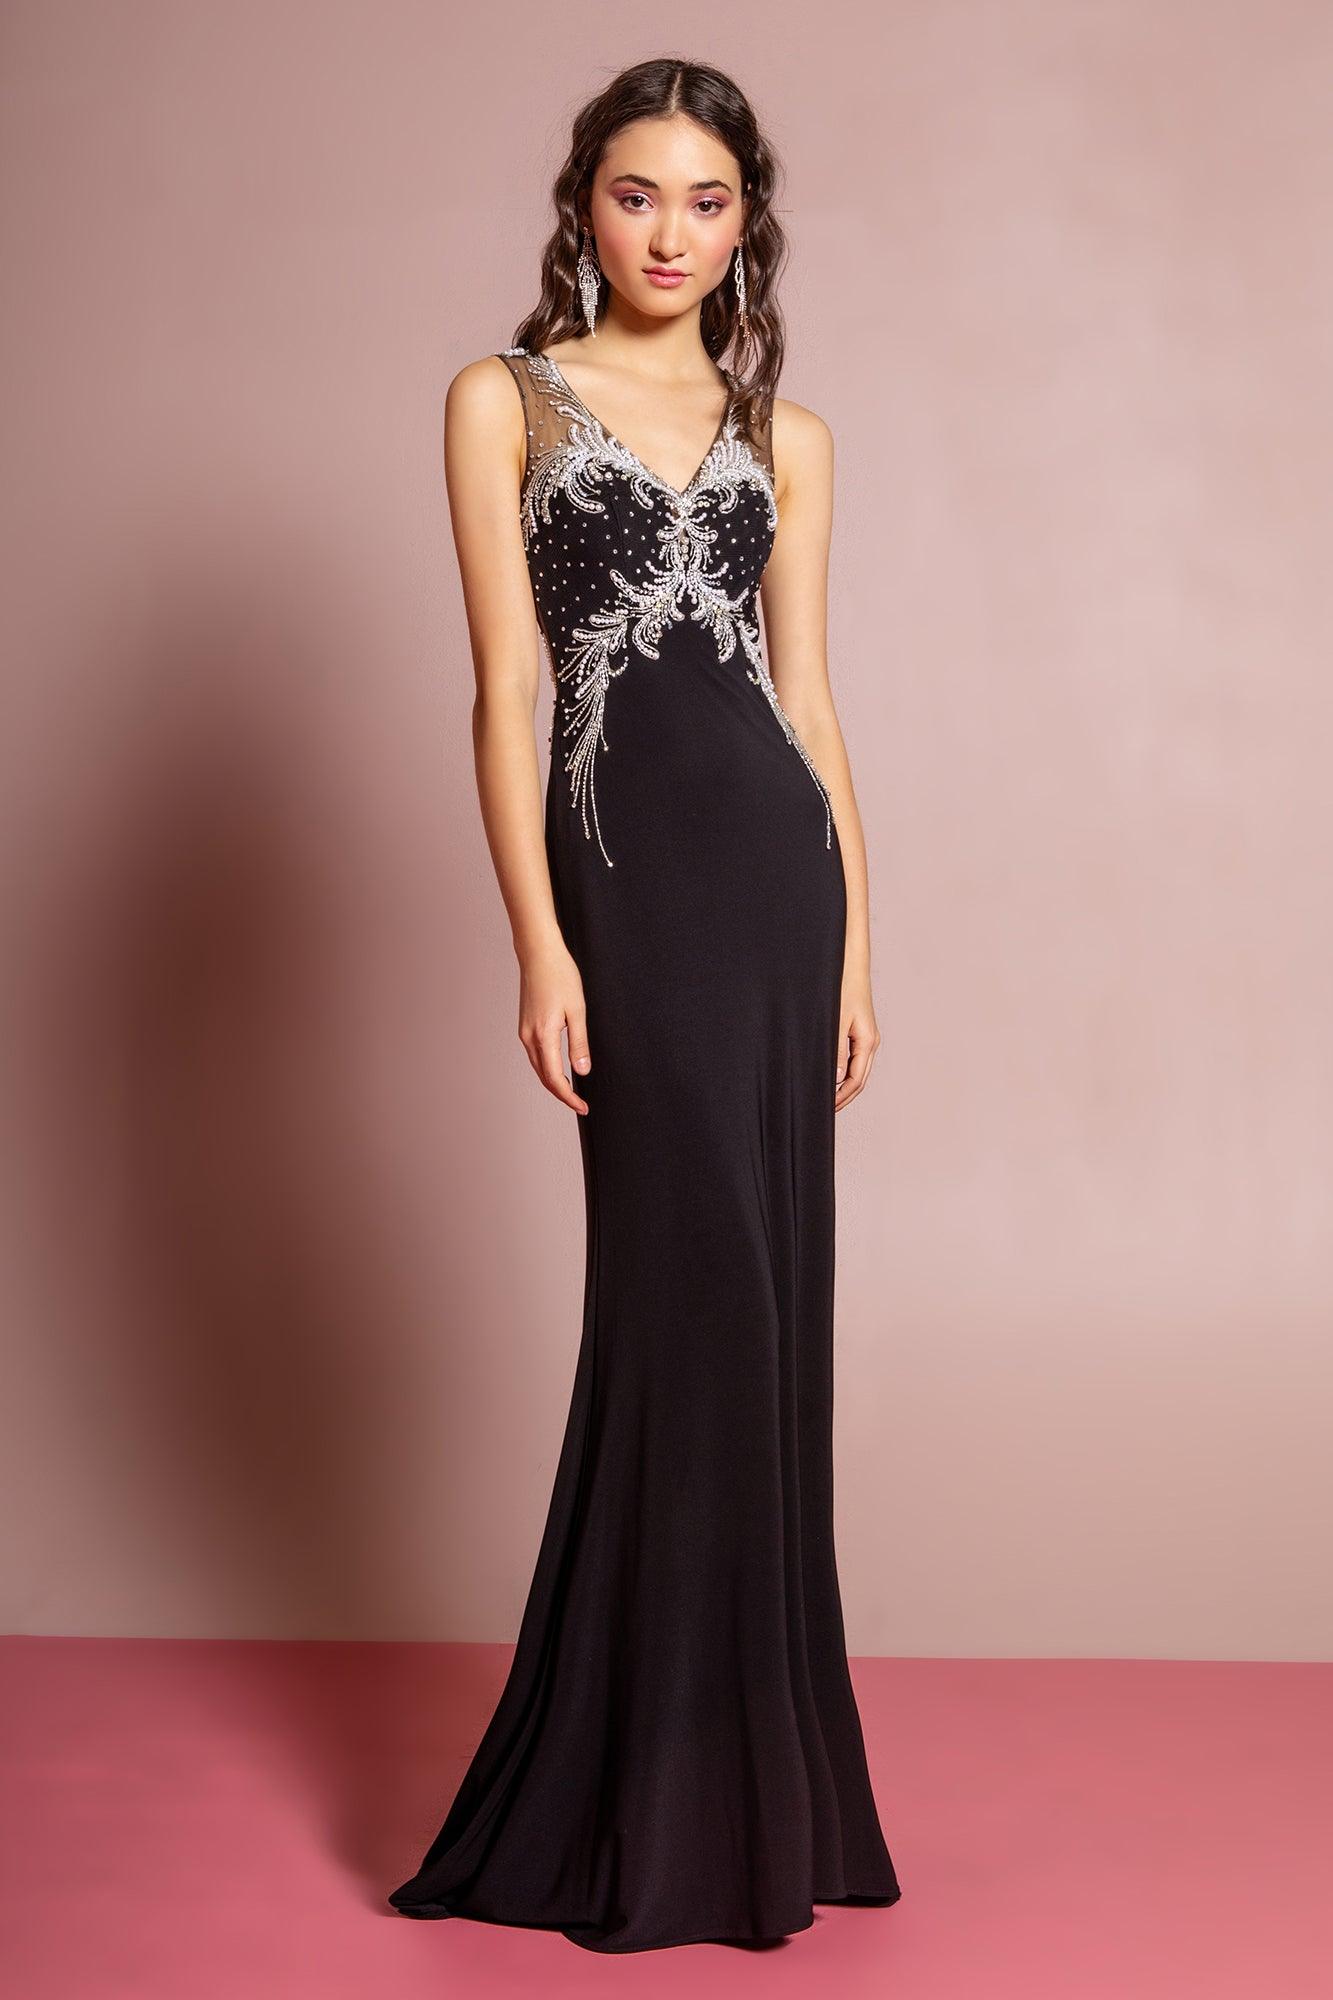 Prom Long Sleeveless Dress Evening Gown - The Dress Outlet Elizabeth K